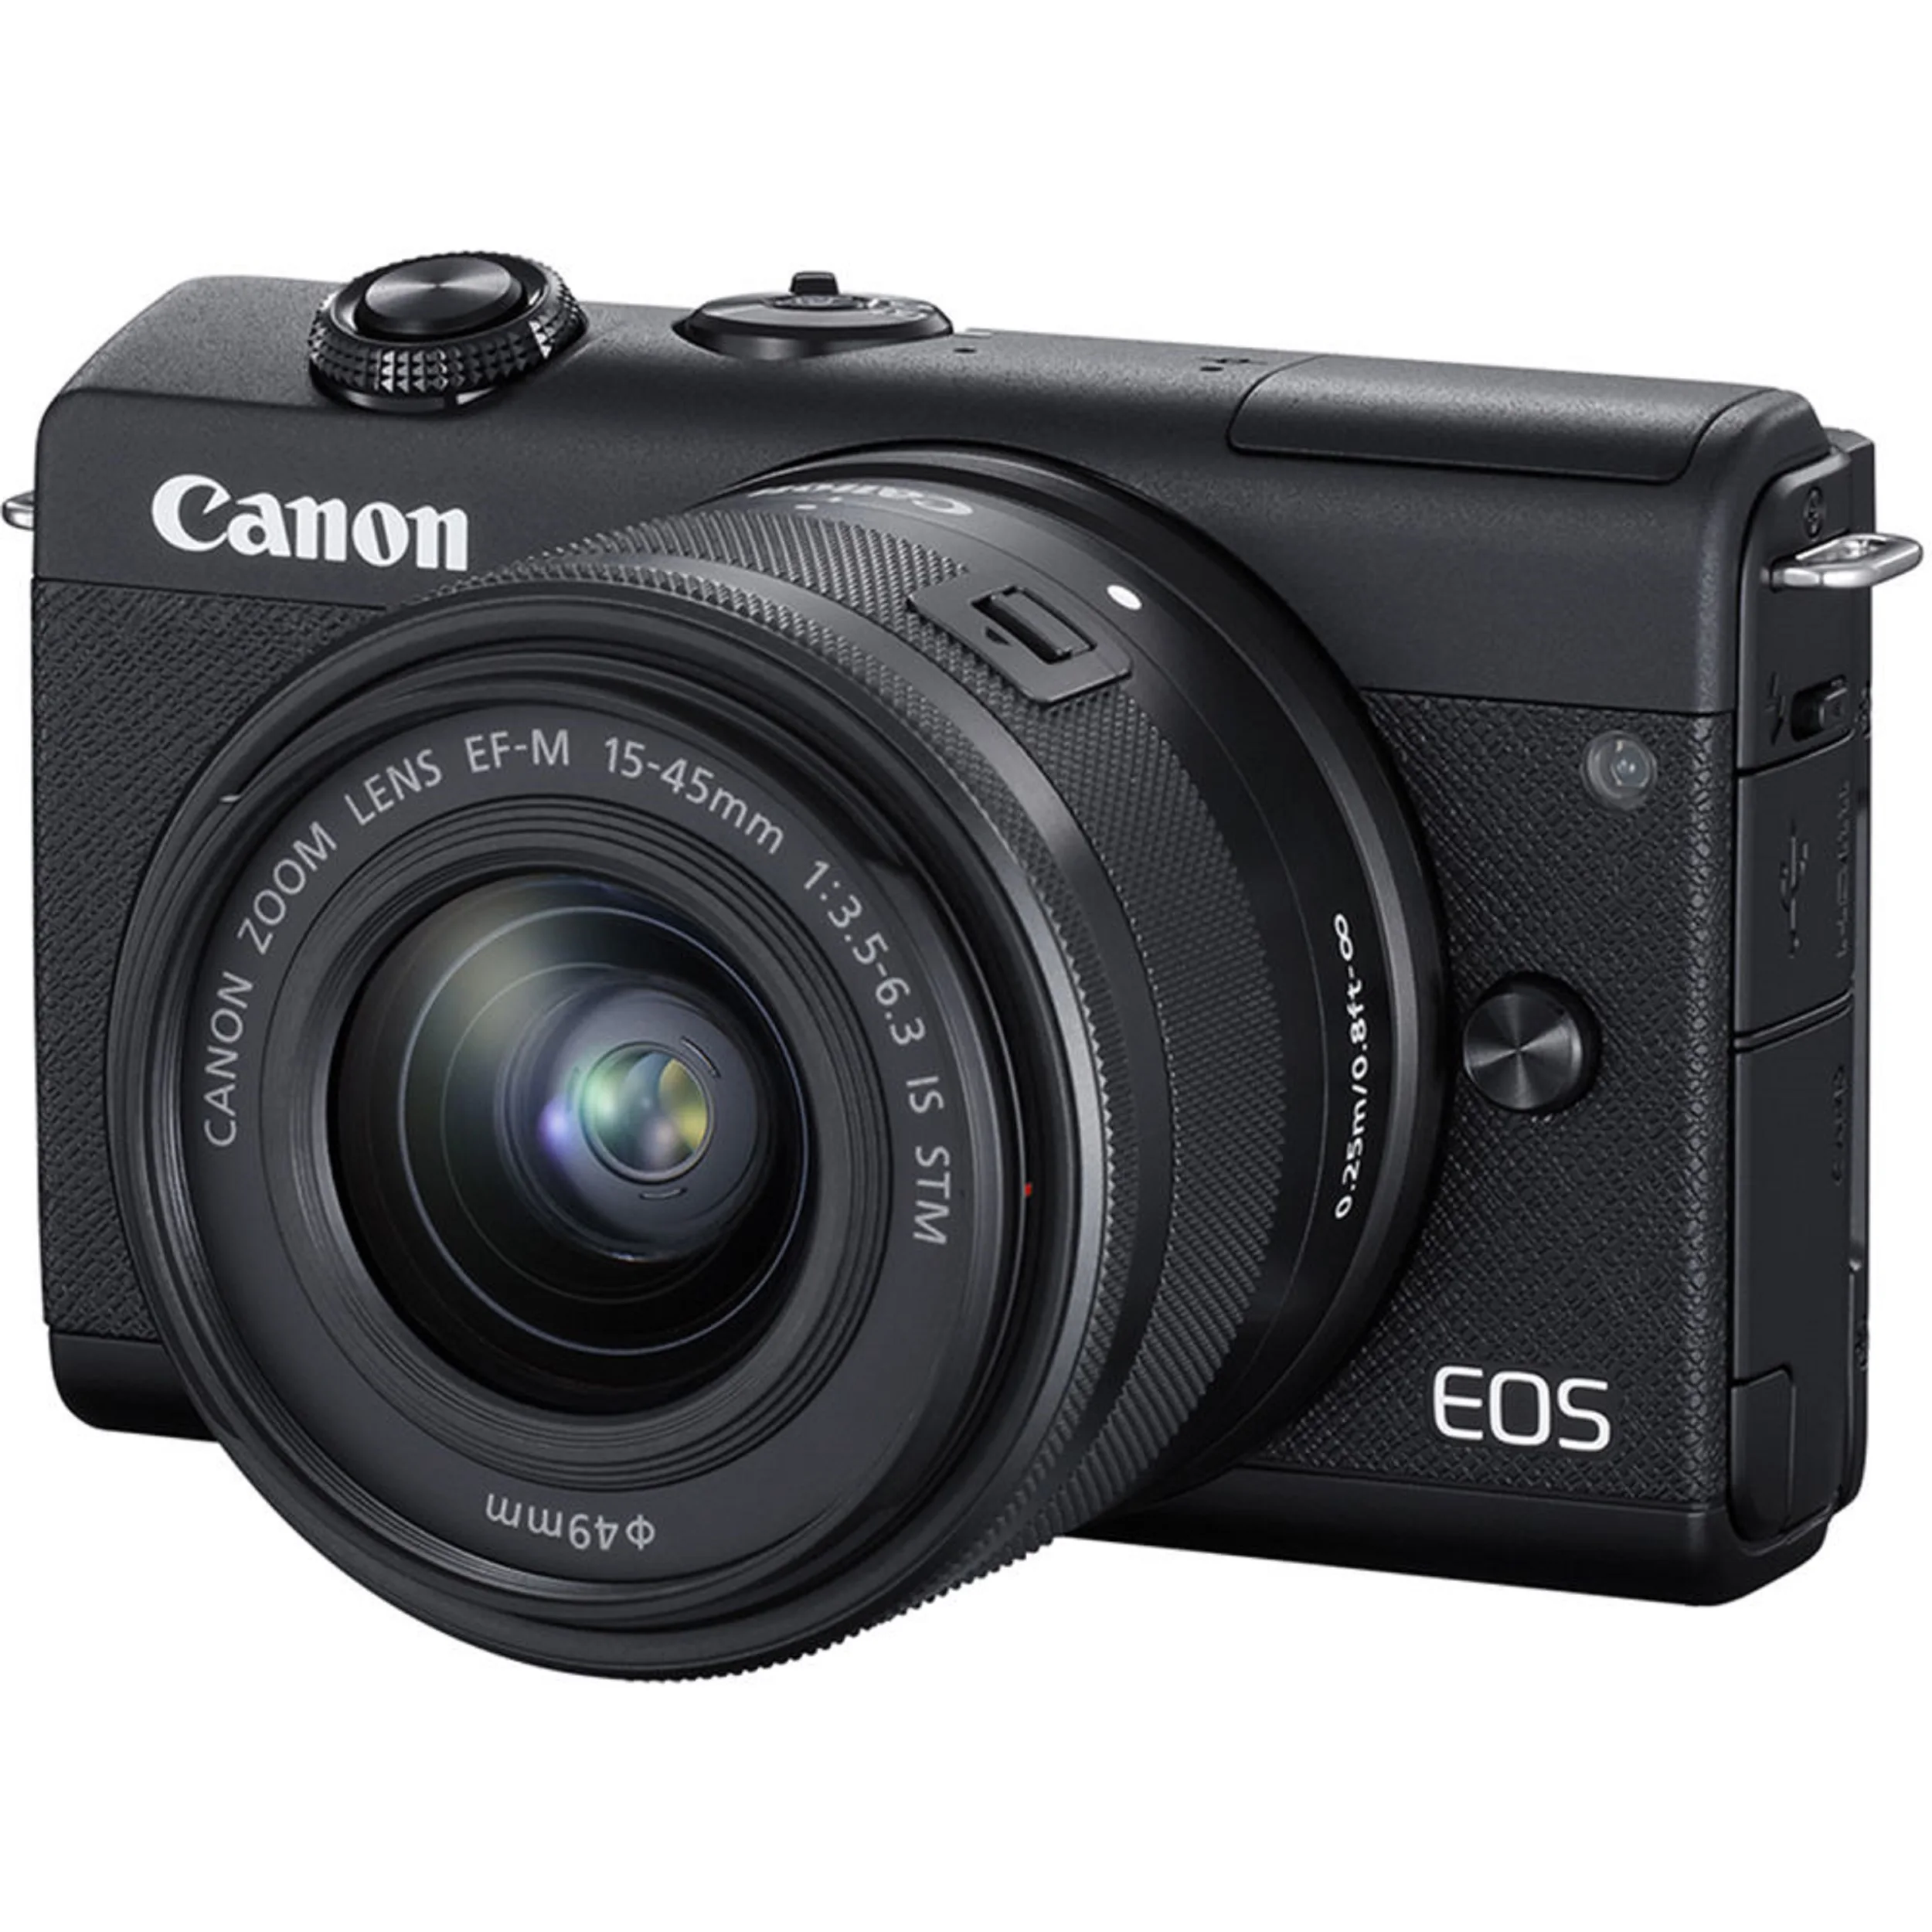 

Canon EOS M200 Black Mirrorless Digital Camera with EF-M 15-45mm F3.5-6.3 IS STM Lens (Black)